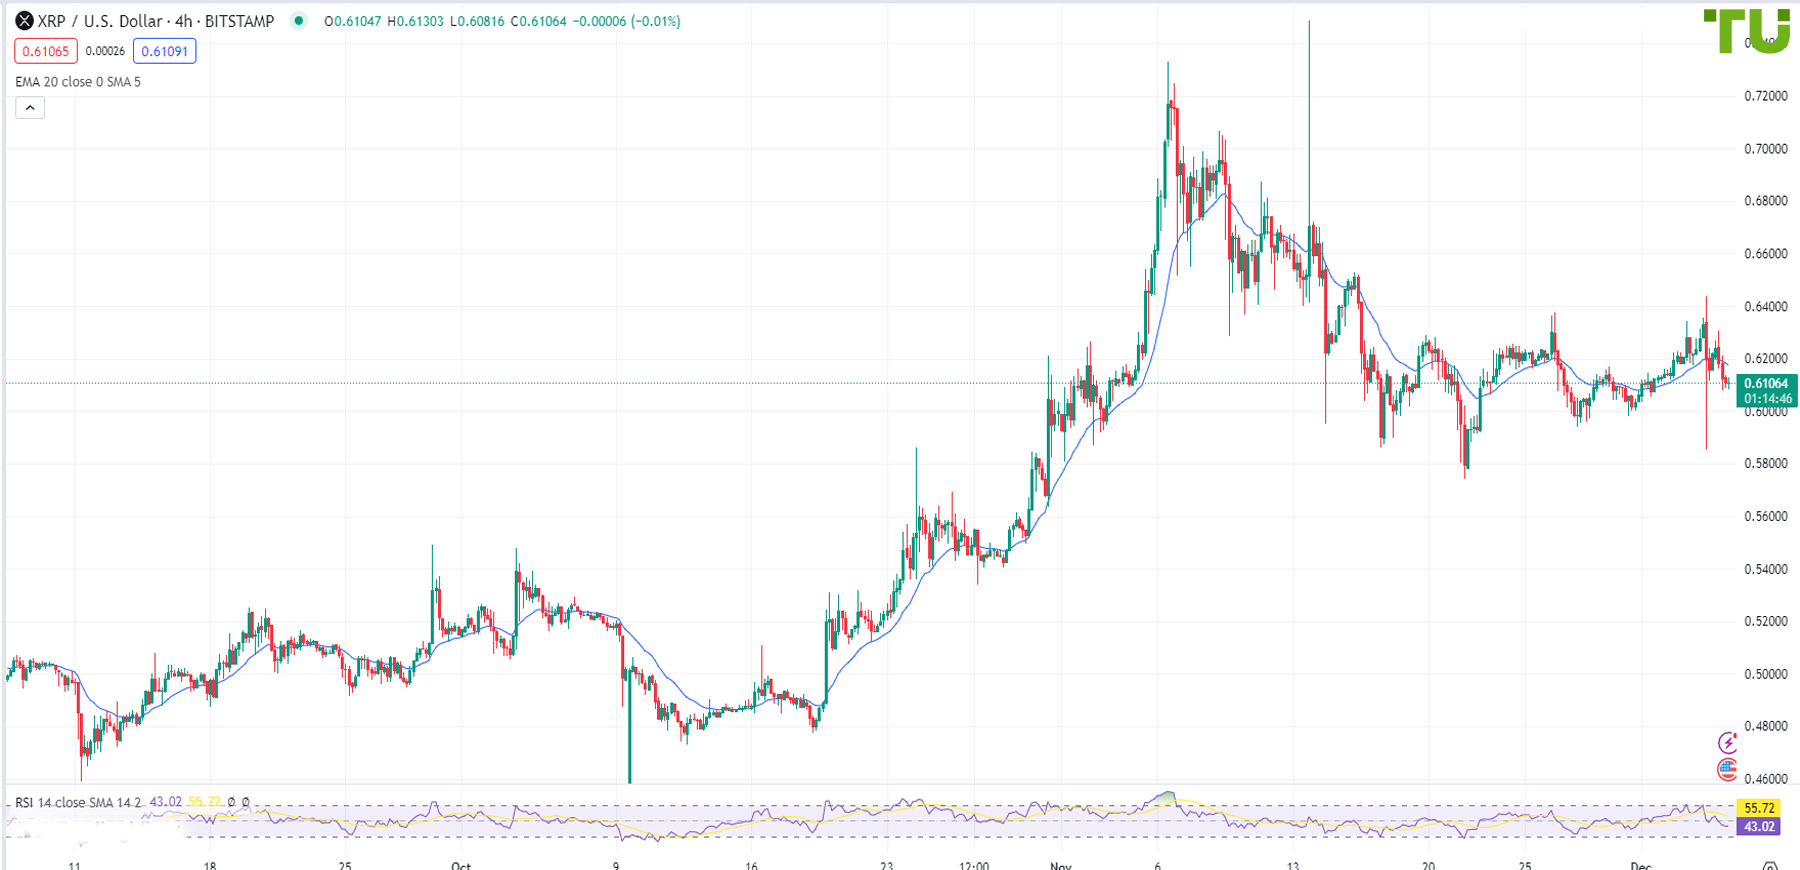 XRP/USD remains in a narrow range